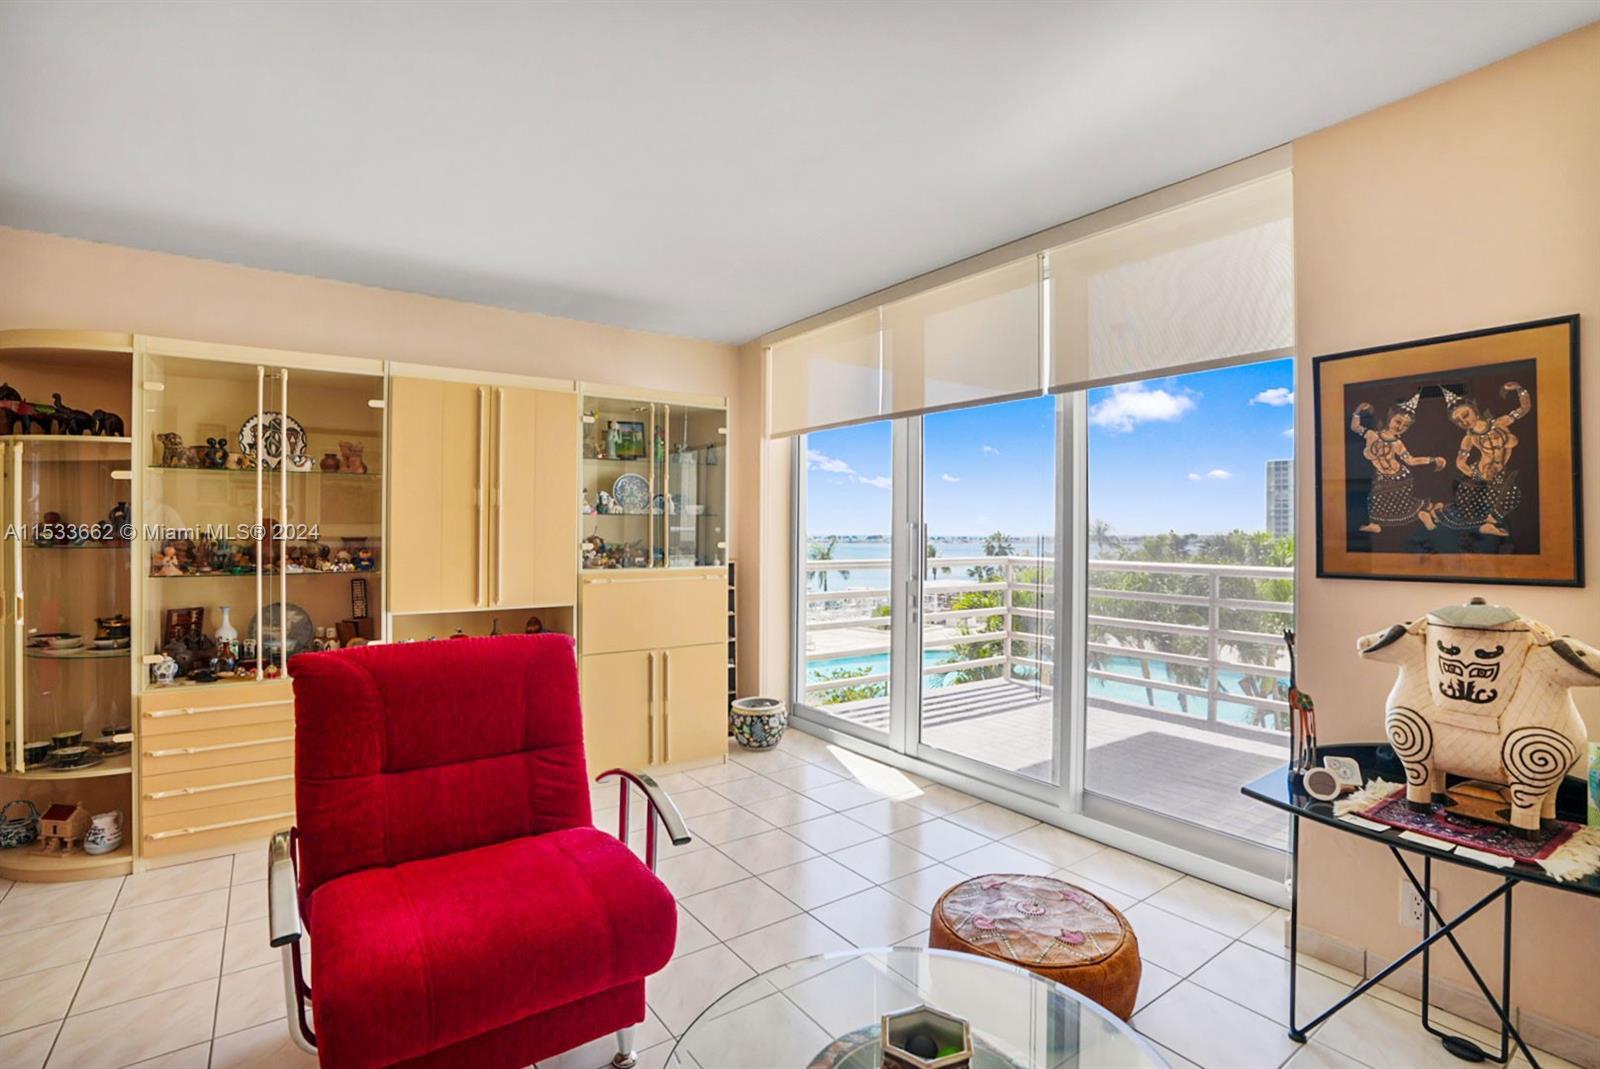 Nice oversized bay front unit 1117 SQFT( 1/1/1.5).  Gorgeous views of Biscayne Bay 24/7.
Experience